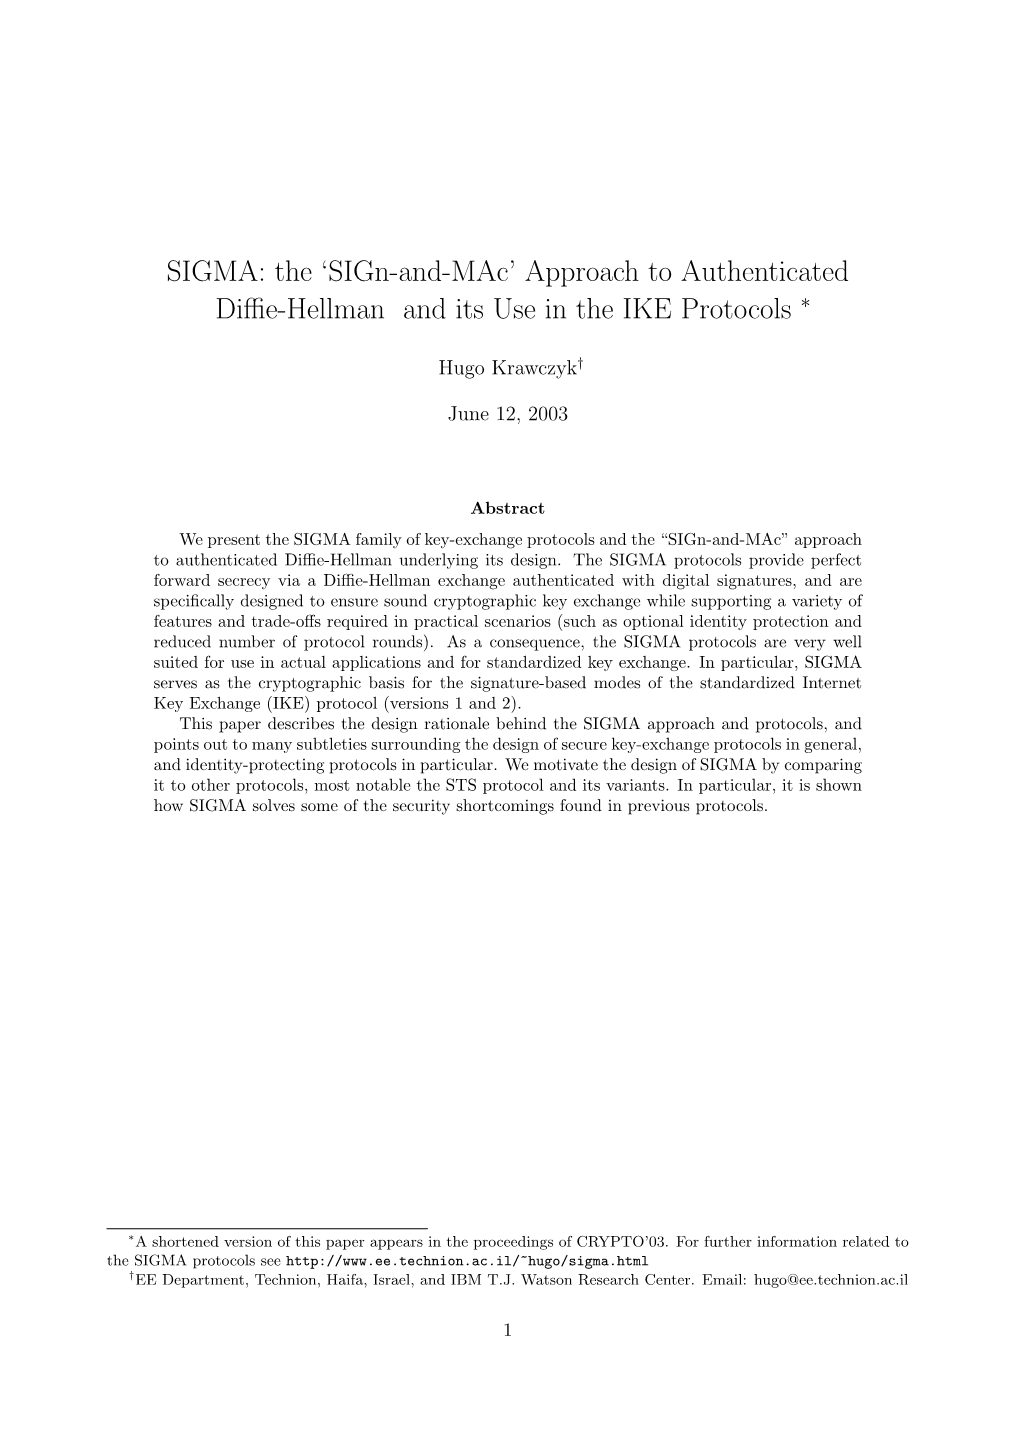 SIGMA: the 'Sign-And-Mac' Approach to Authenticated Diffie-Hellman and Its Use in the IKE Protocols